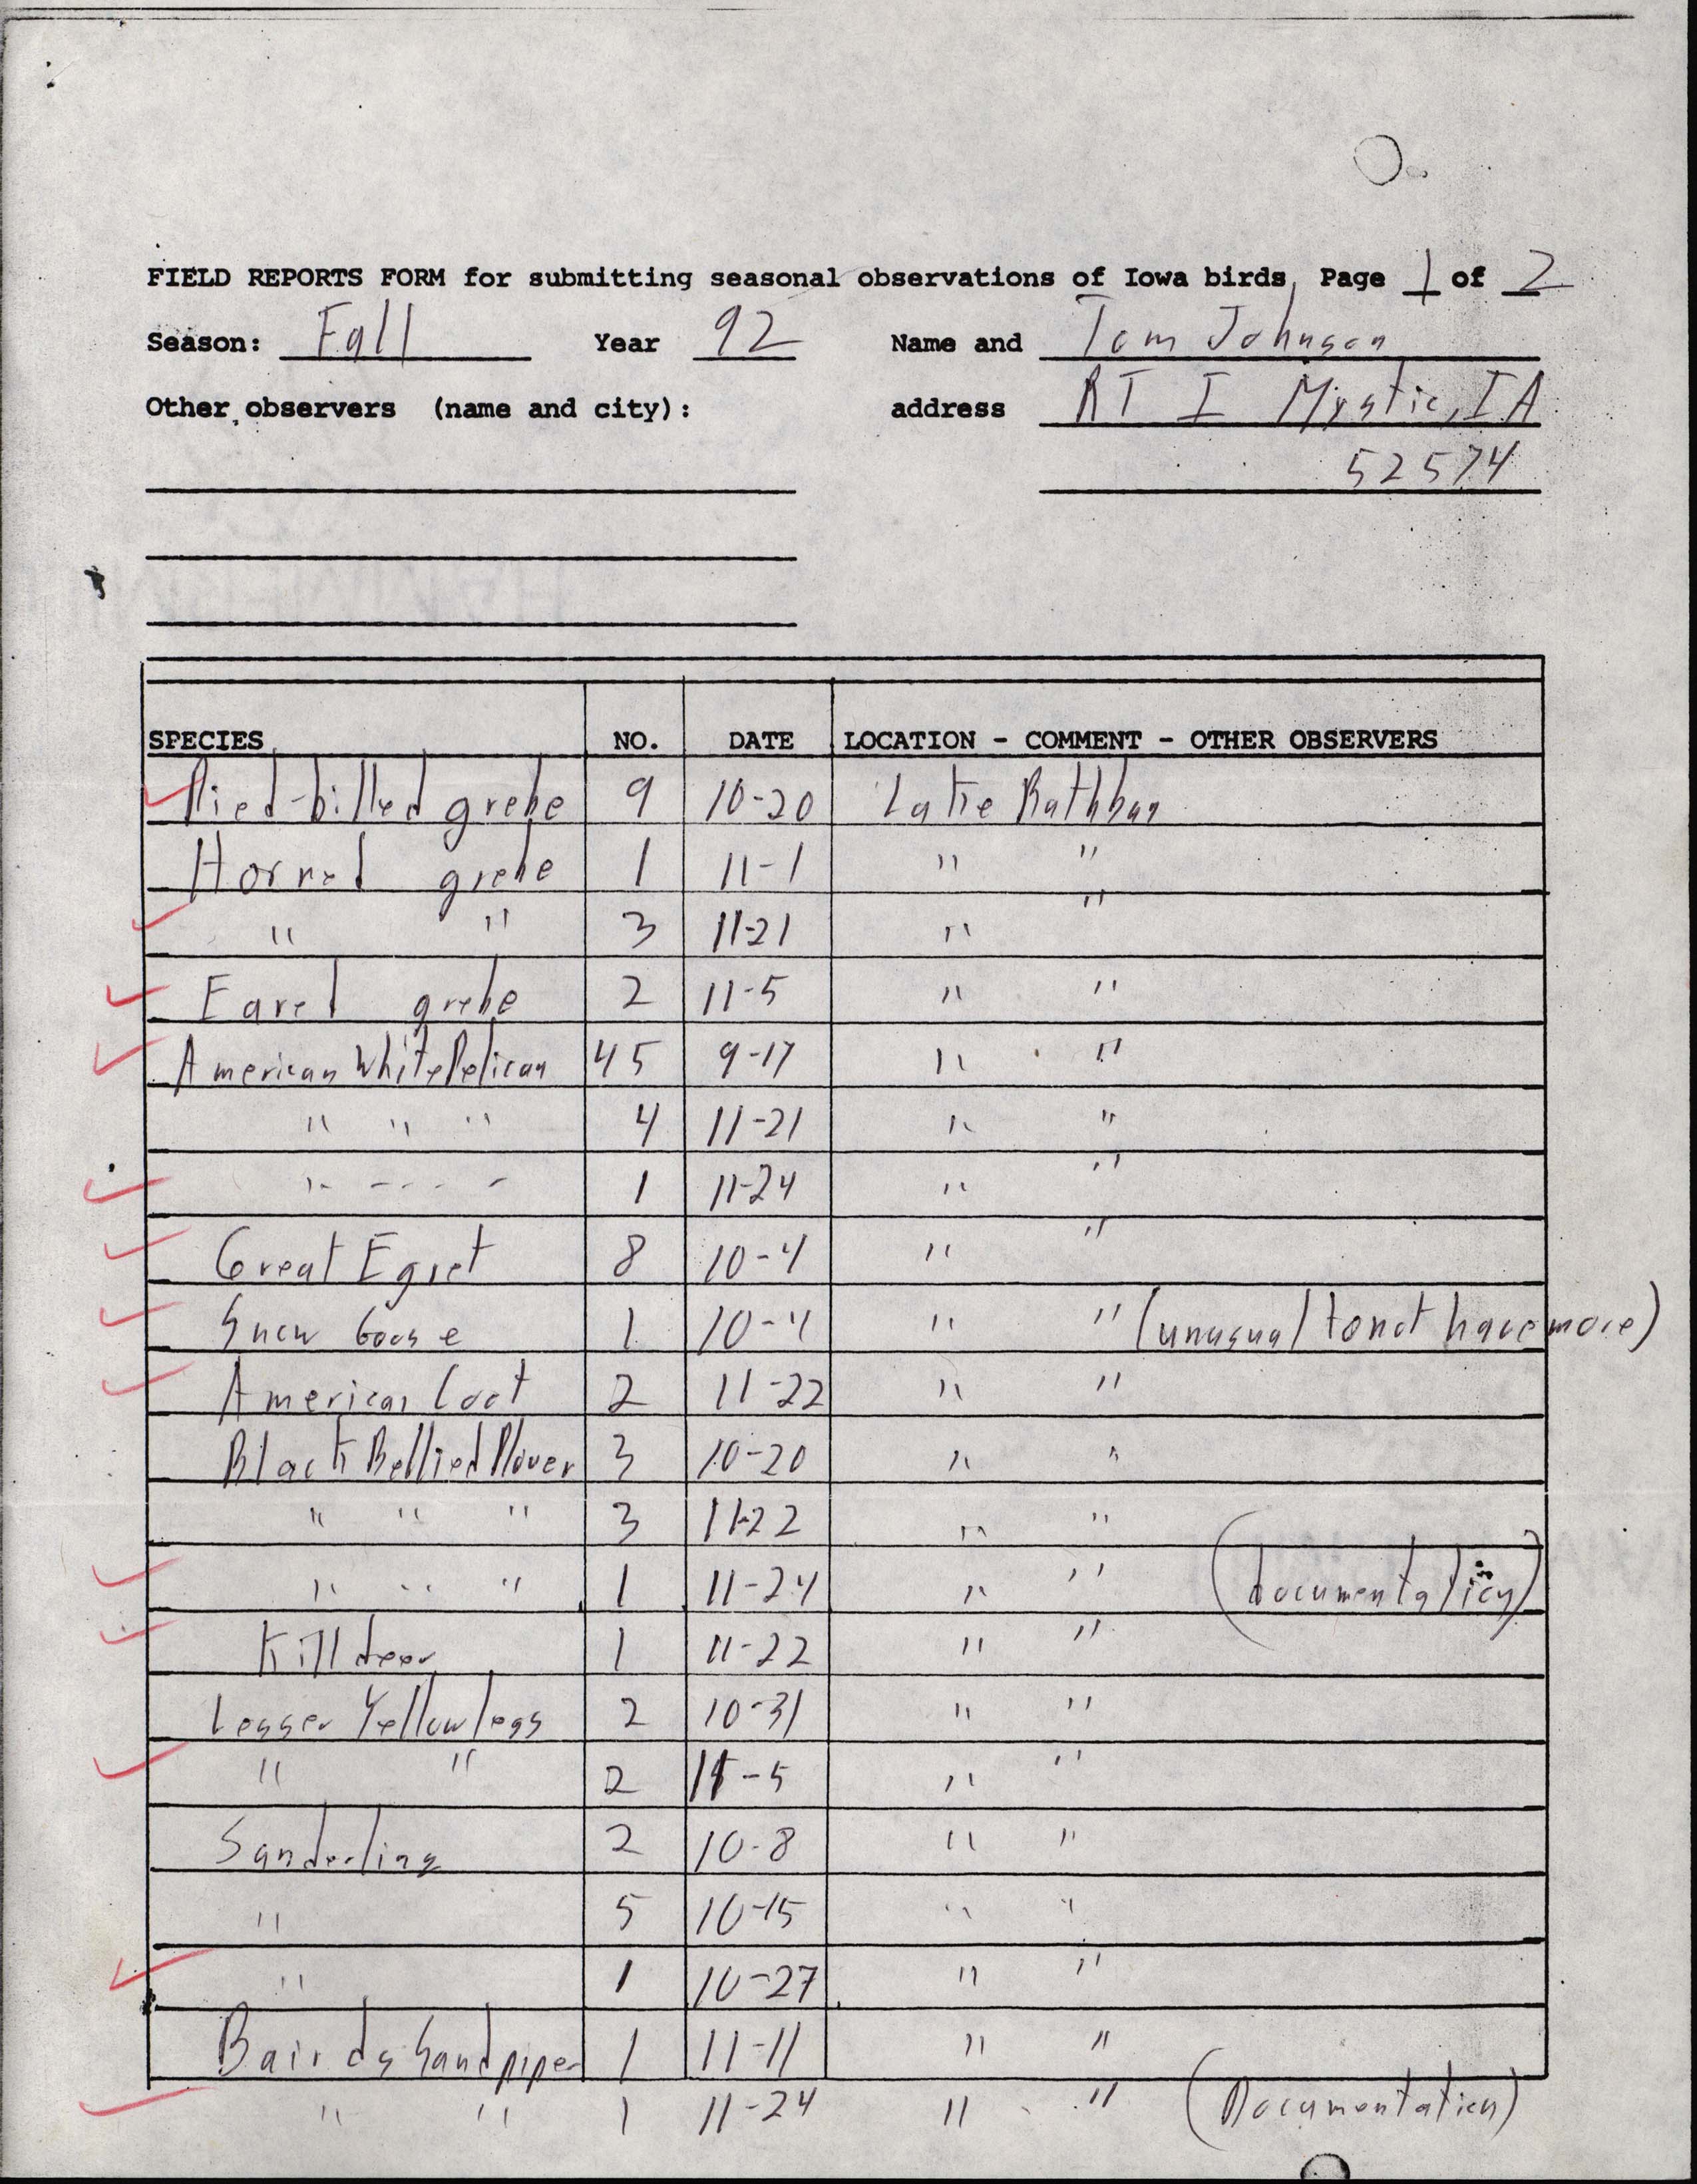 Field reports form for submitting seasonal observations of Iowa birds, Tom Johnson, fall 1992